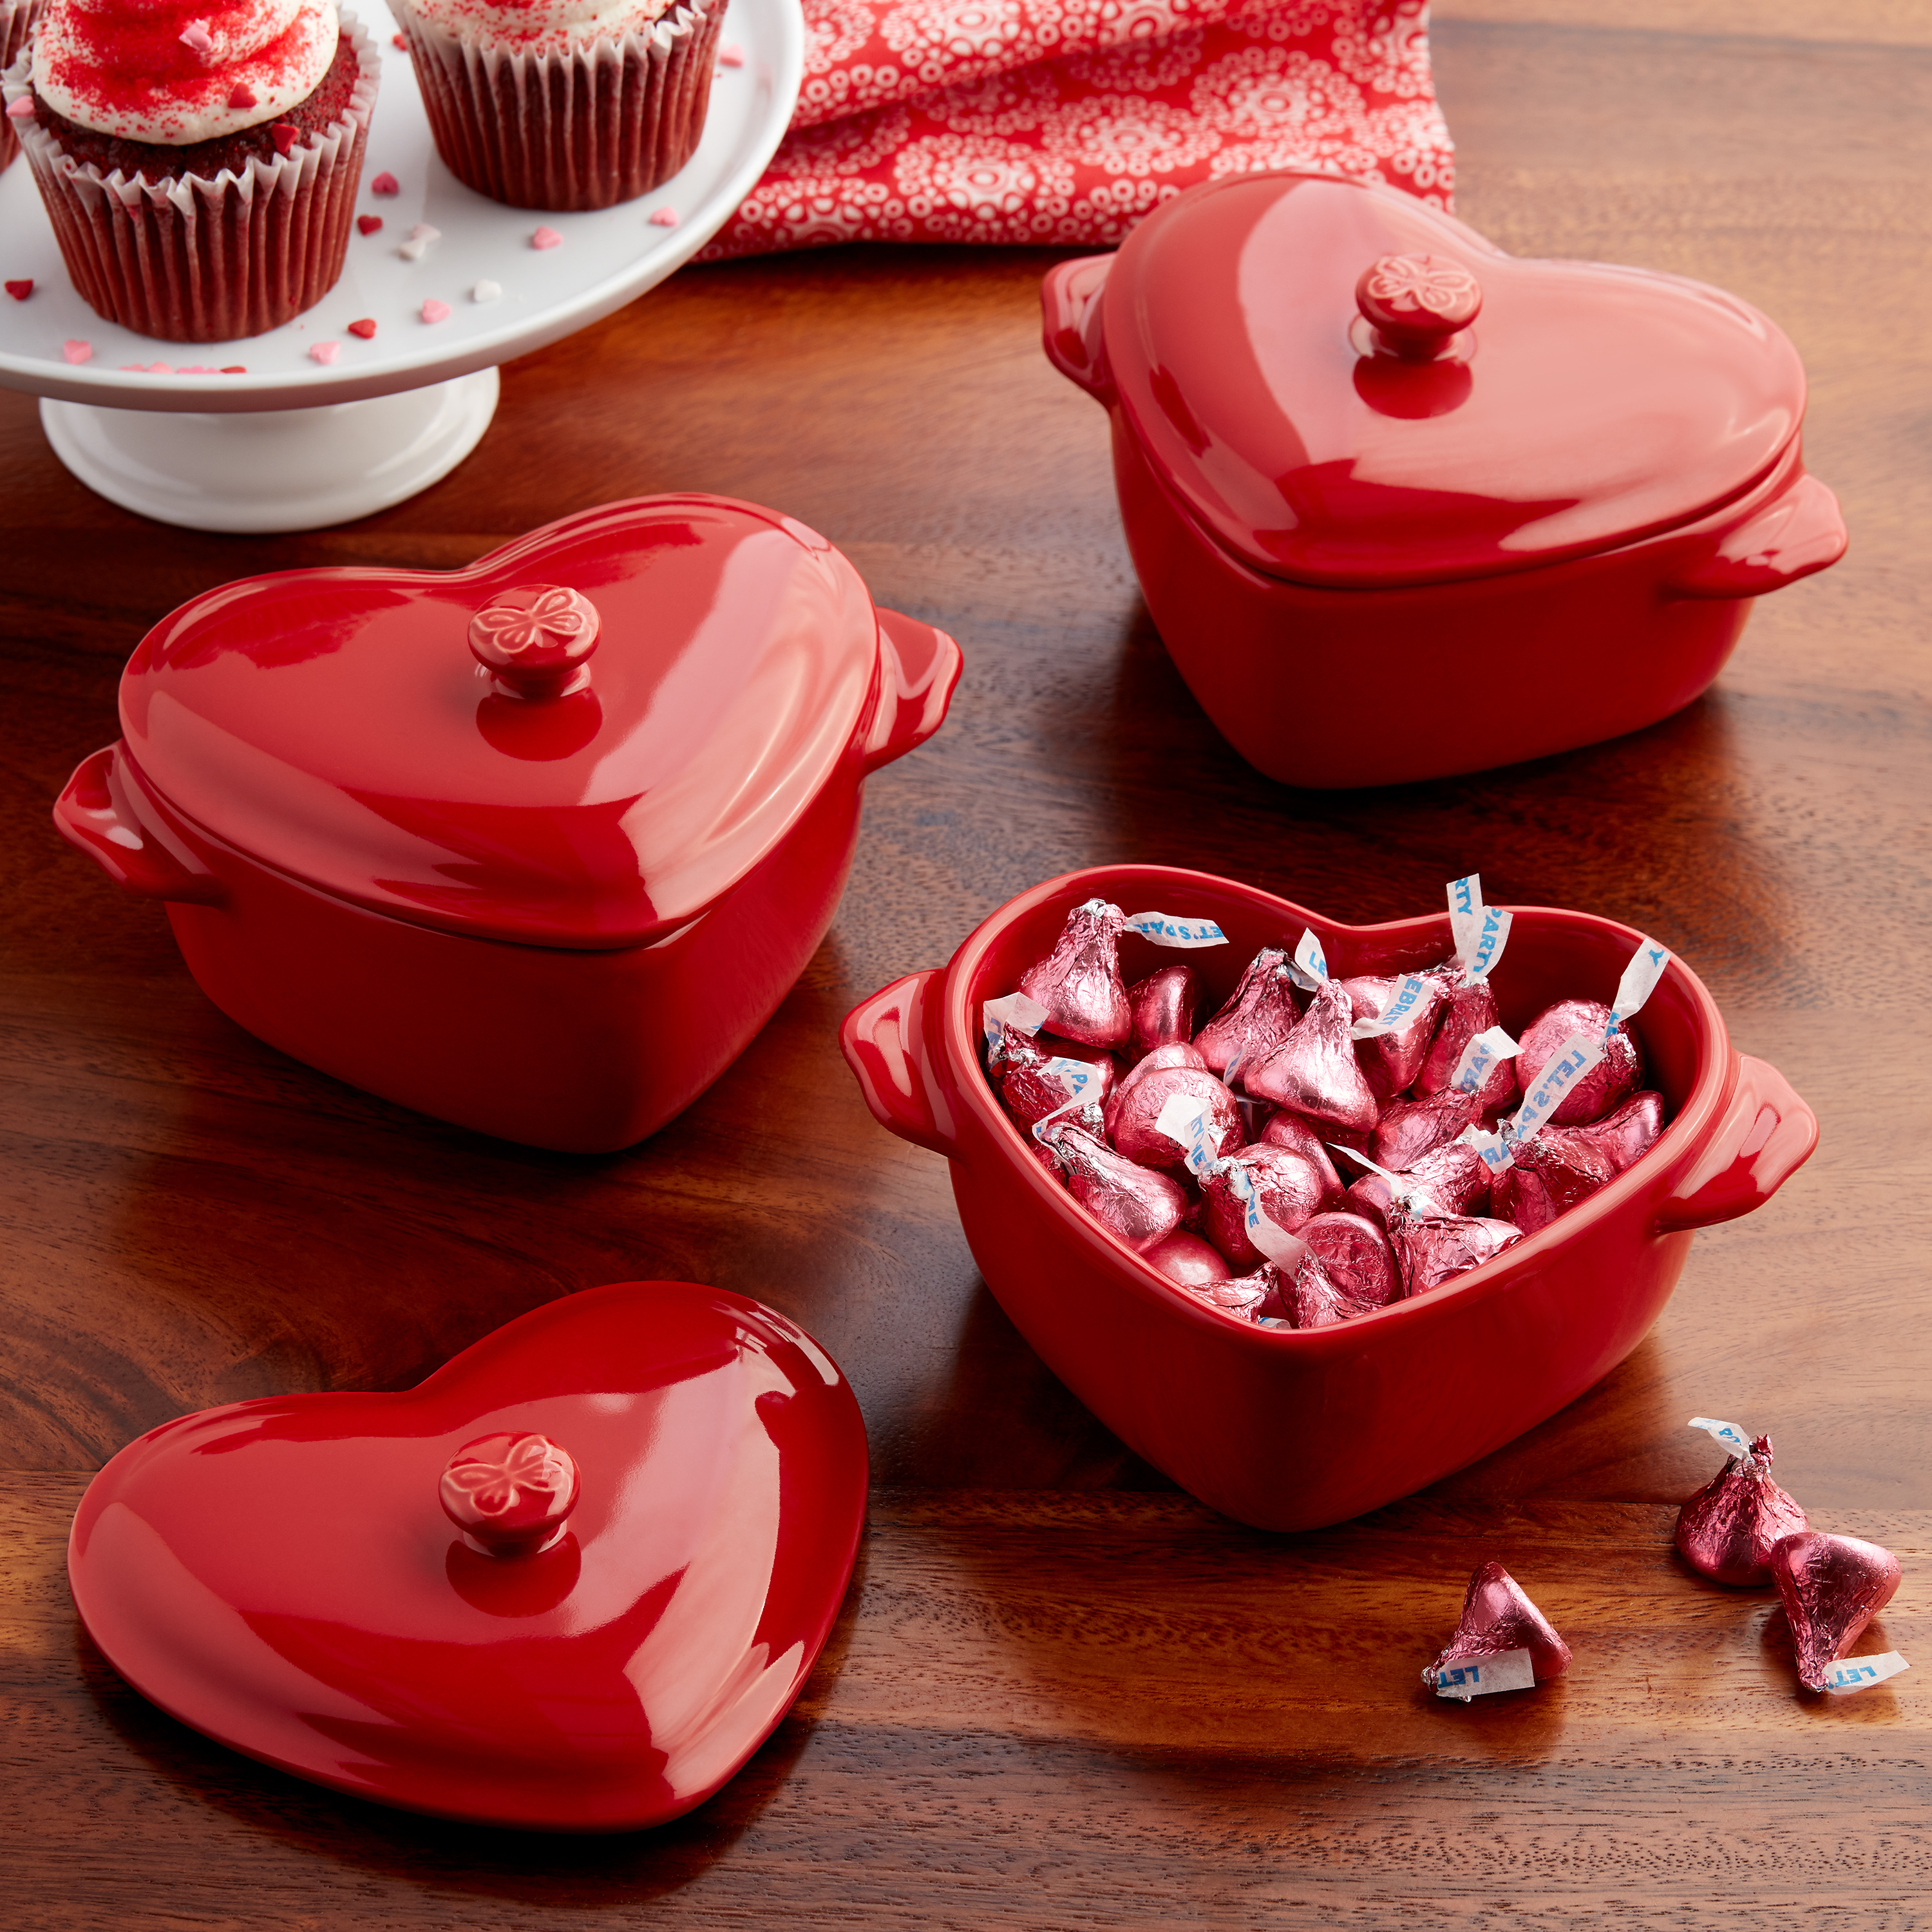 3 Red Mini Heart, Ceramic Baking Dish with Lid, The Pioneer Woman 6.45" - image 4 of 7